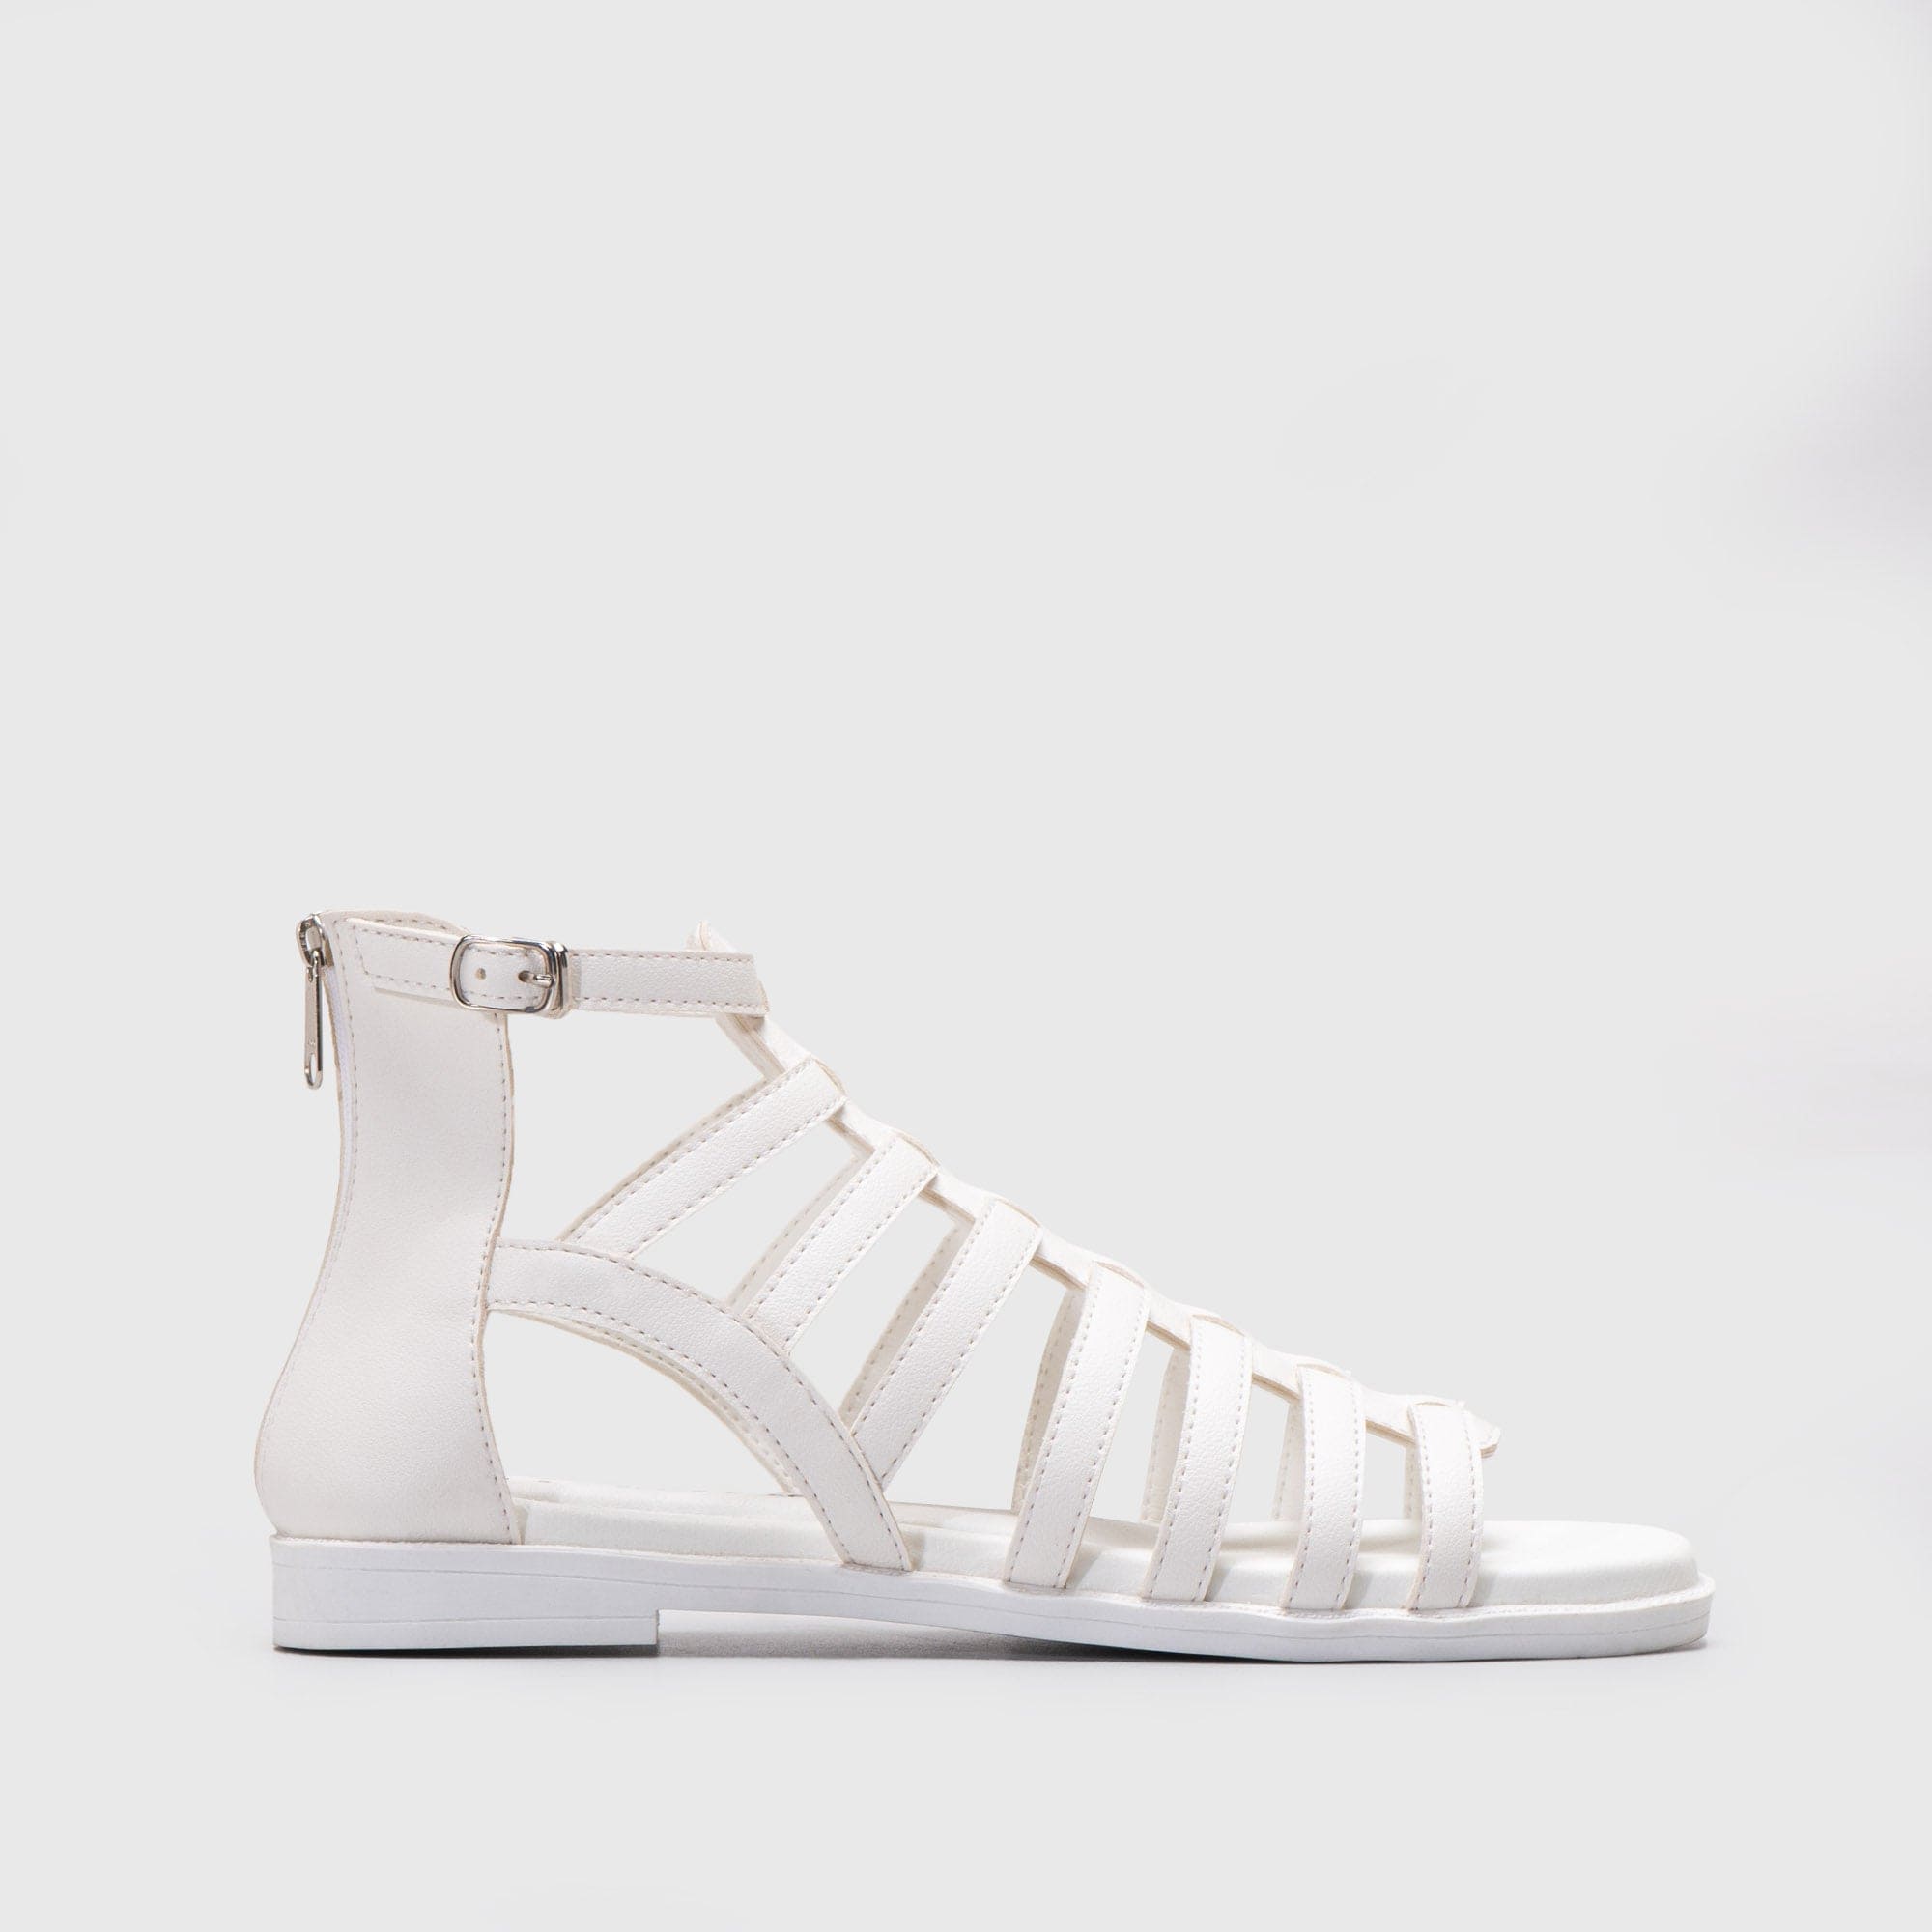 Adorable Projects Official Adorableprojects - Faresta Sandals White - Sendal Gladiator